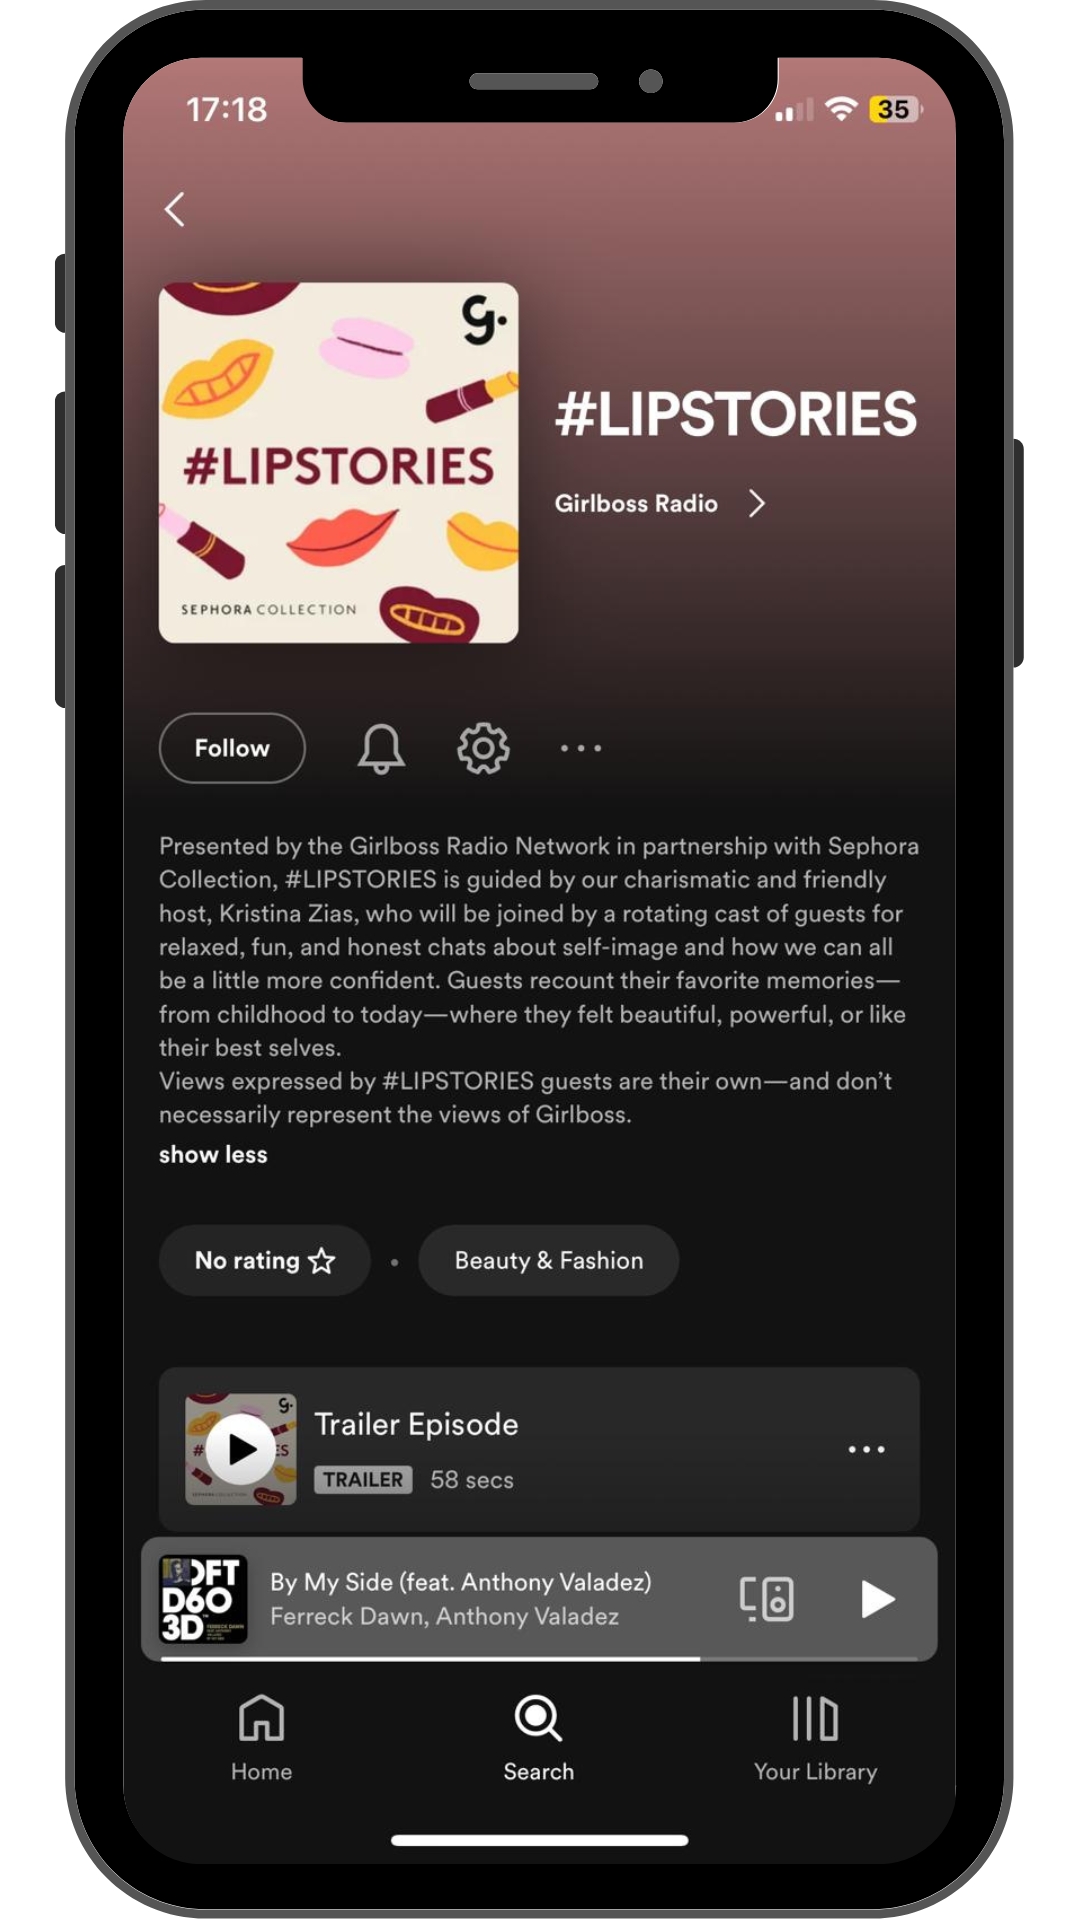 how to start a podcast: lipstories